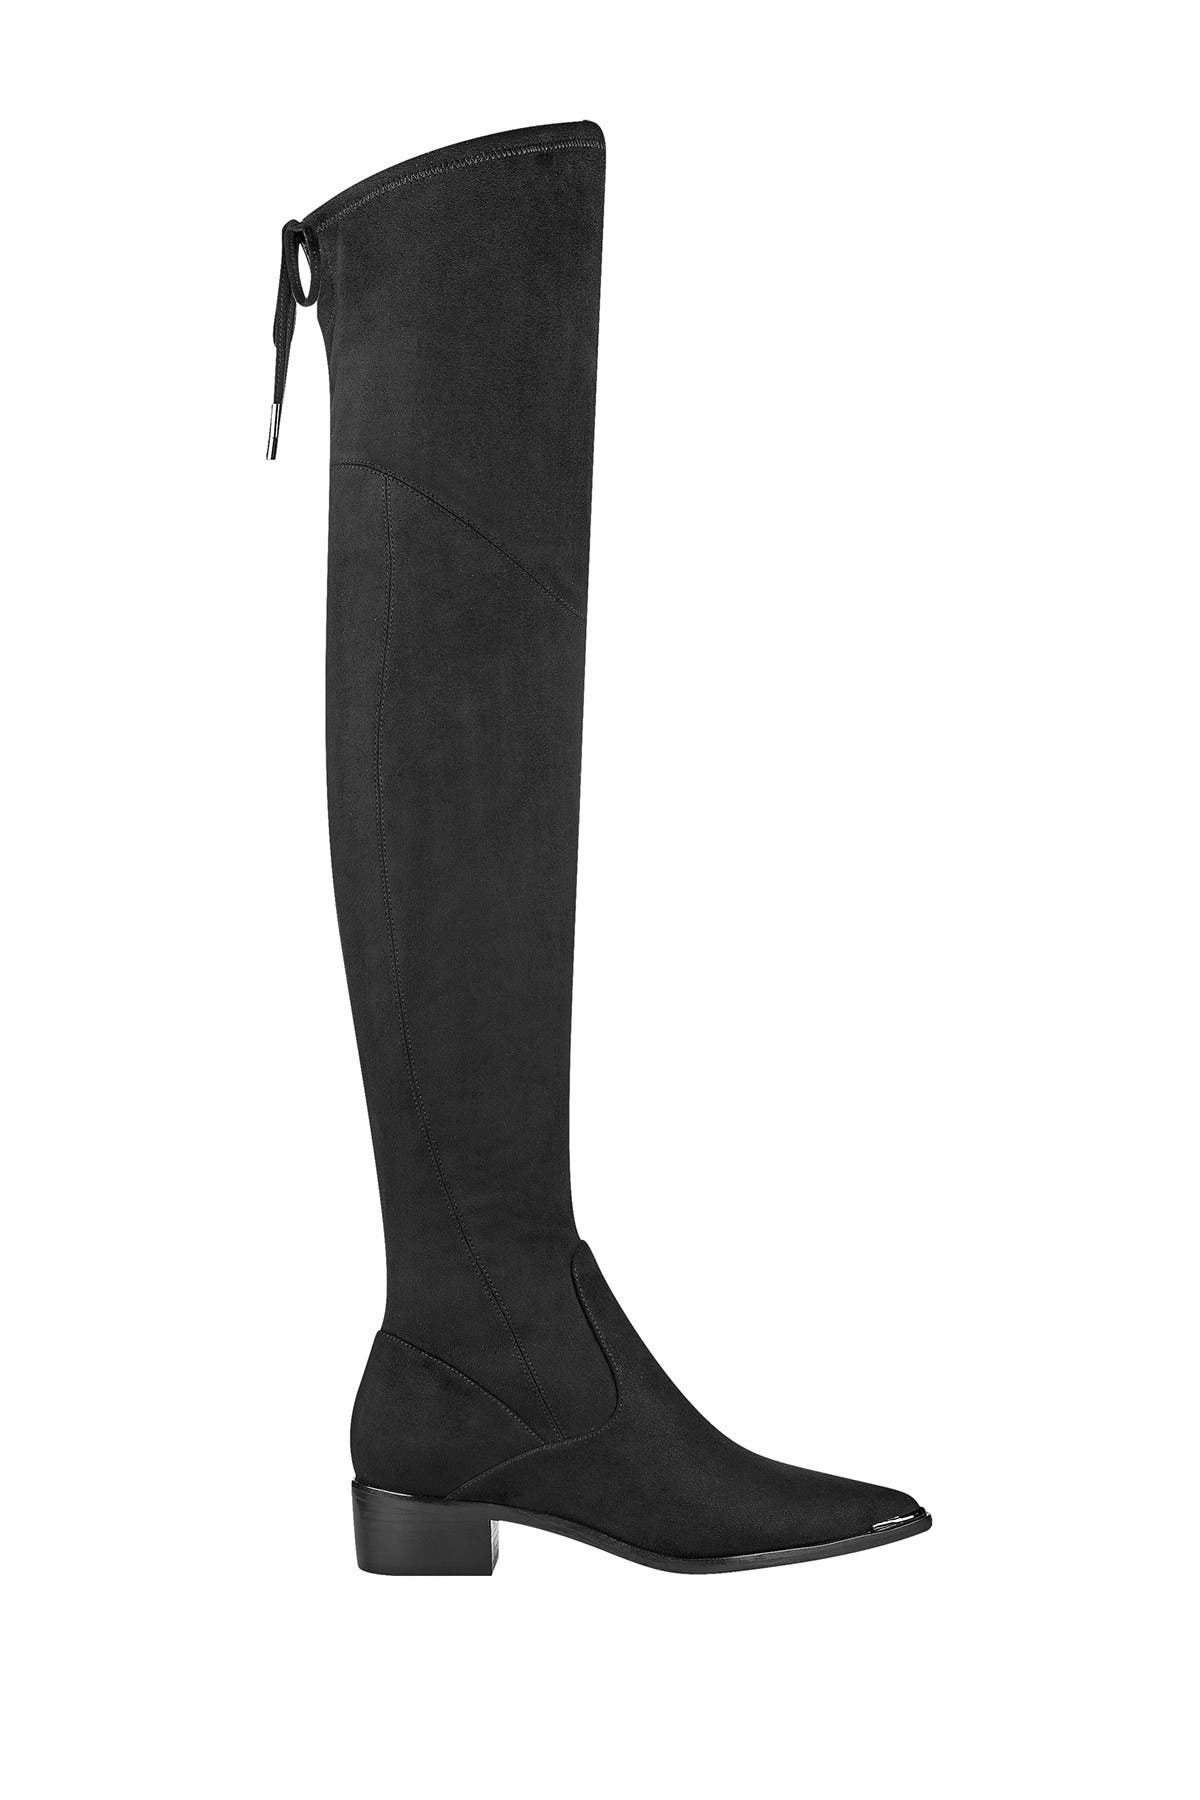 yuna over the knee boot marc fisher ltd